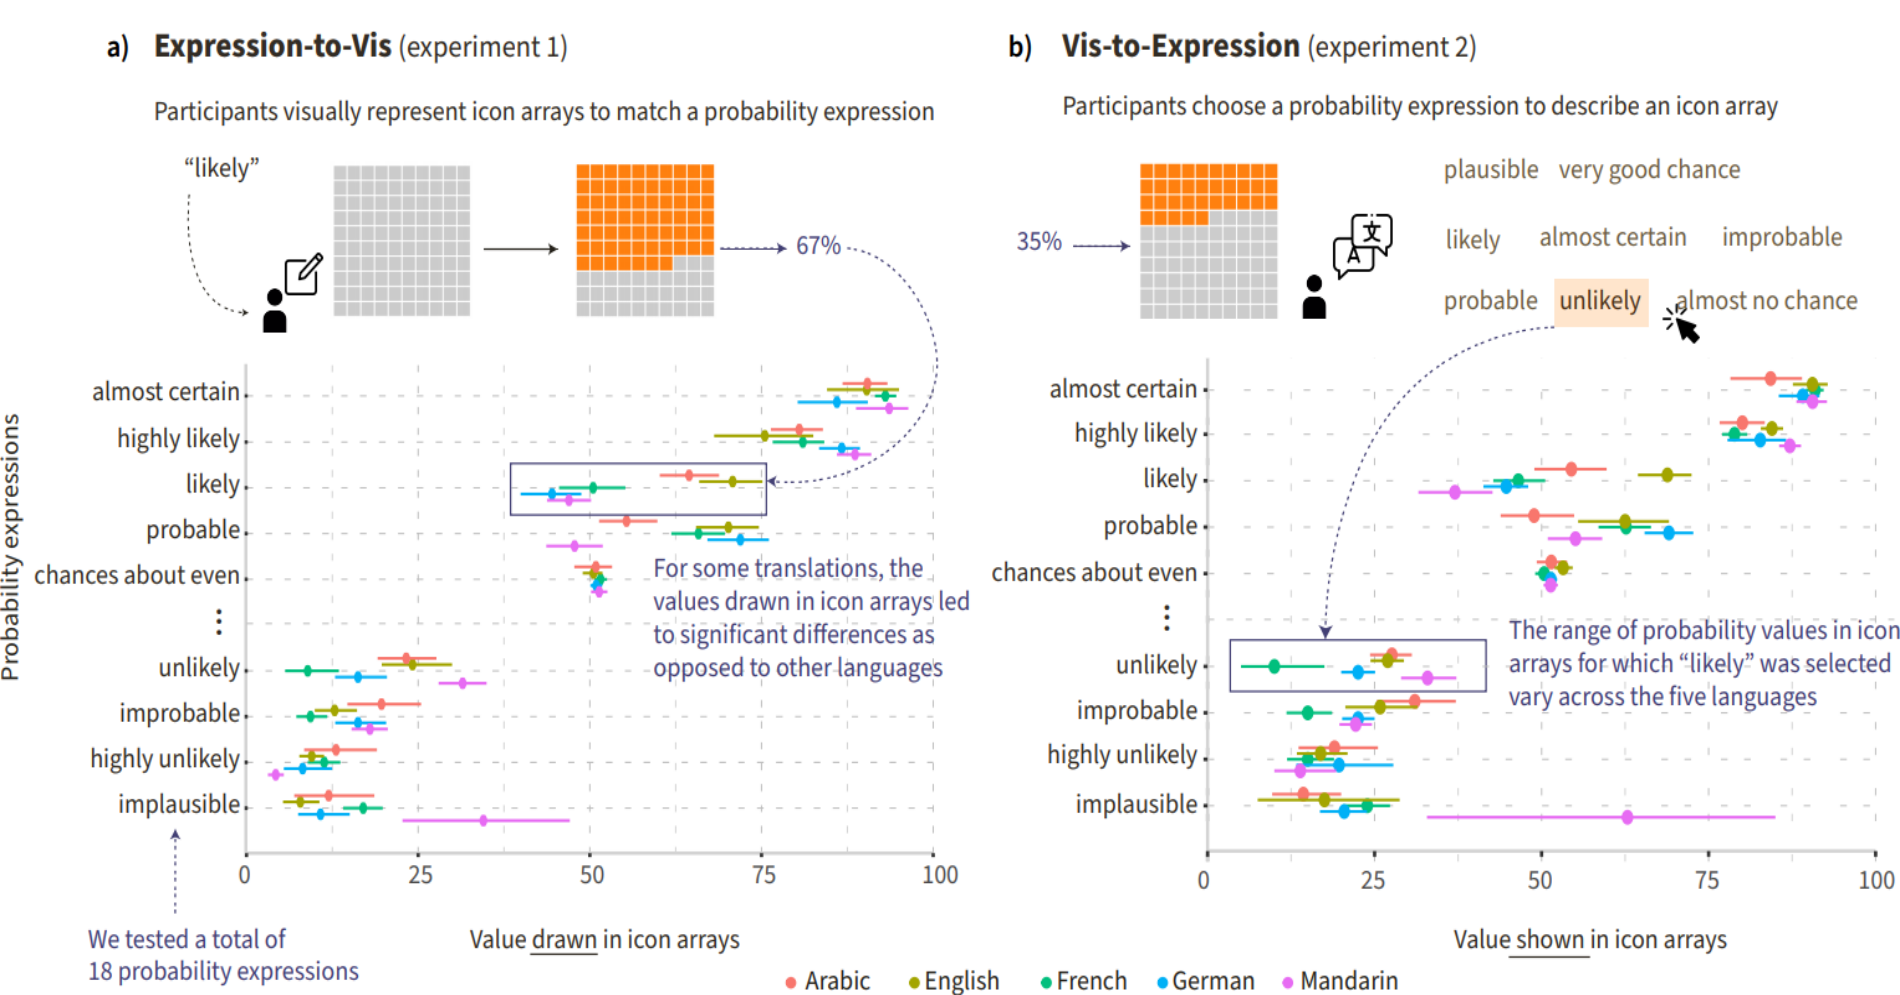 Two charts showing results from two experiments. Left: Expression-to-Vis experiment. A user icon, an icon array with 100 gray icons, an arrow pointing to a second icon array with 67 icons in orange are above a graph that shows the 95% confidence interval of the values drawn on the icon arrays on the x-axis. The list of probability expressions is on the y-axis. Five 95% confidence intervals representing the range of drawn values in the five languages are displayed for each probability expression. Right: Vis-to-Expression experiment. A user icon, an icon array with 35 orange icons, and a list of probability expressions with the expression 'likely' highlighted are above a confidence interval graph that shows the value appearing on the icon array on the x-axis. The list of probability expressions is on the y-axis. Five 95% confidence intervals representing the range of drawn values in the five languages are displayed for each probability expression.